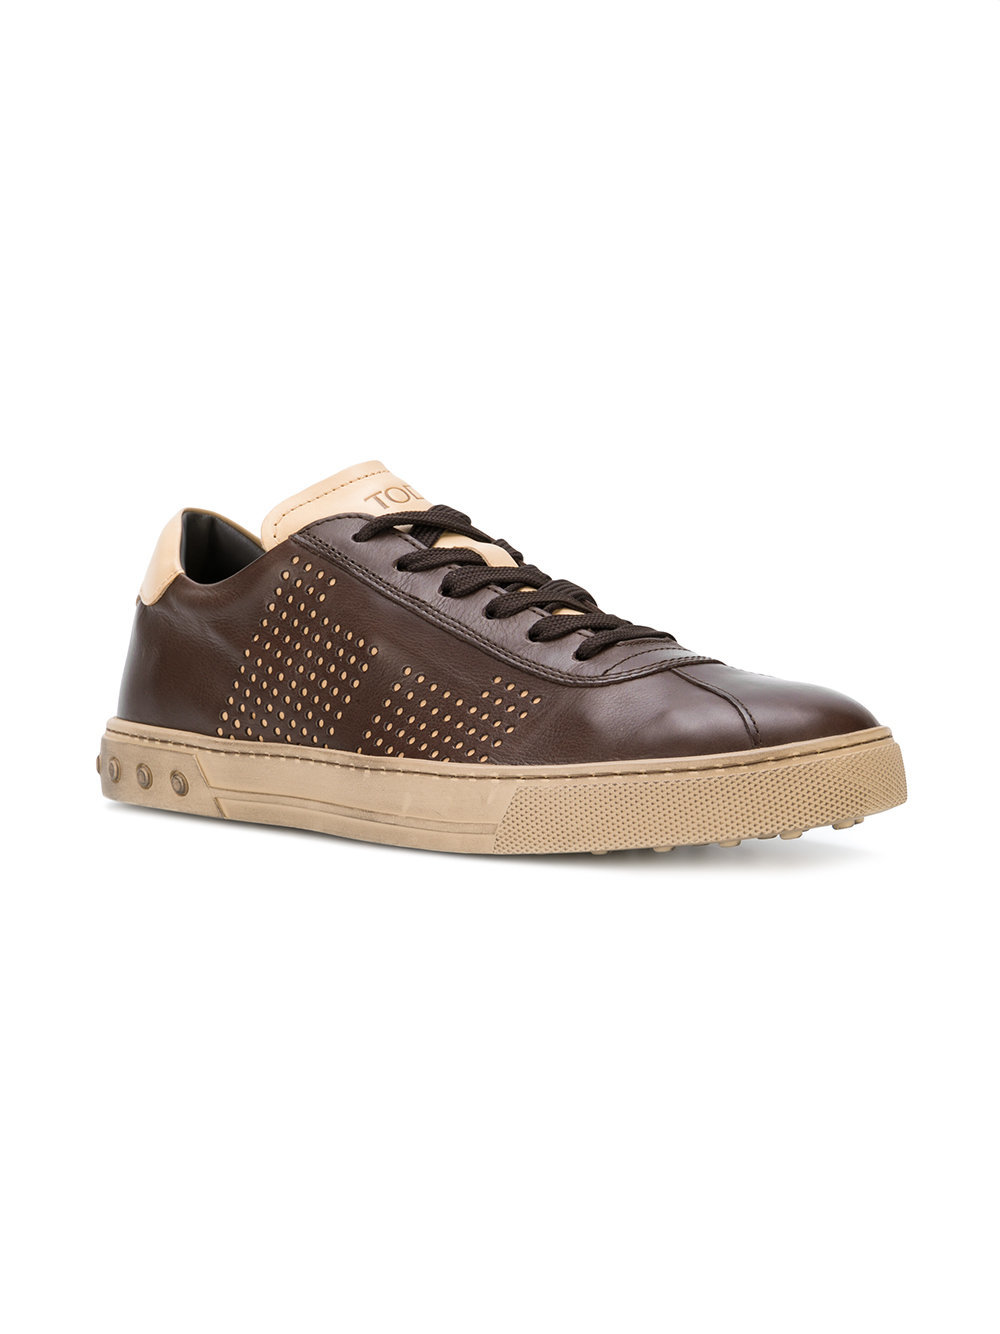 tod's perforated sneakers